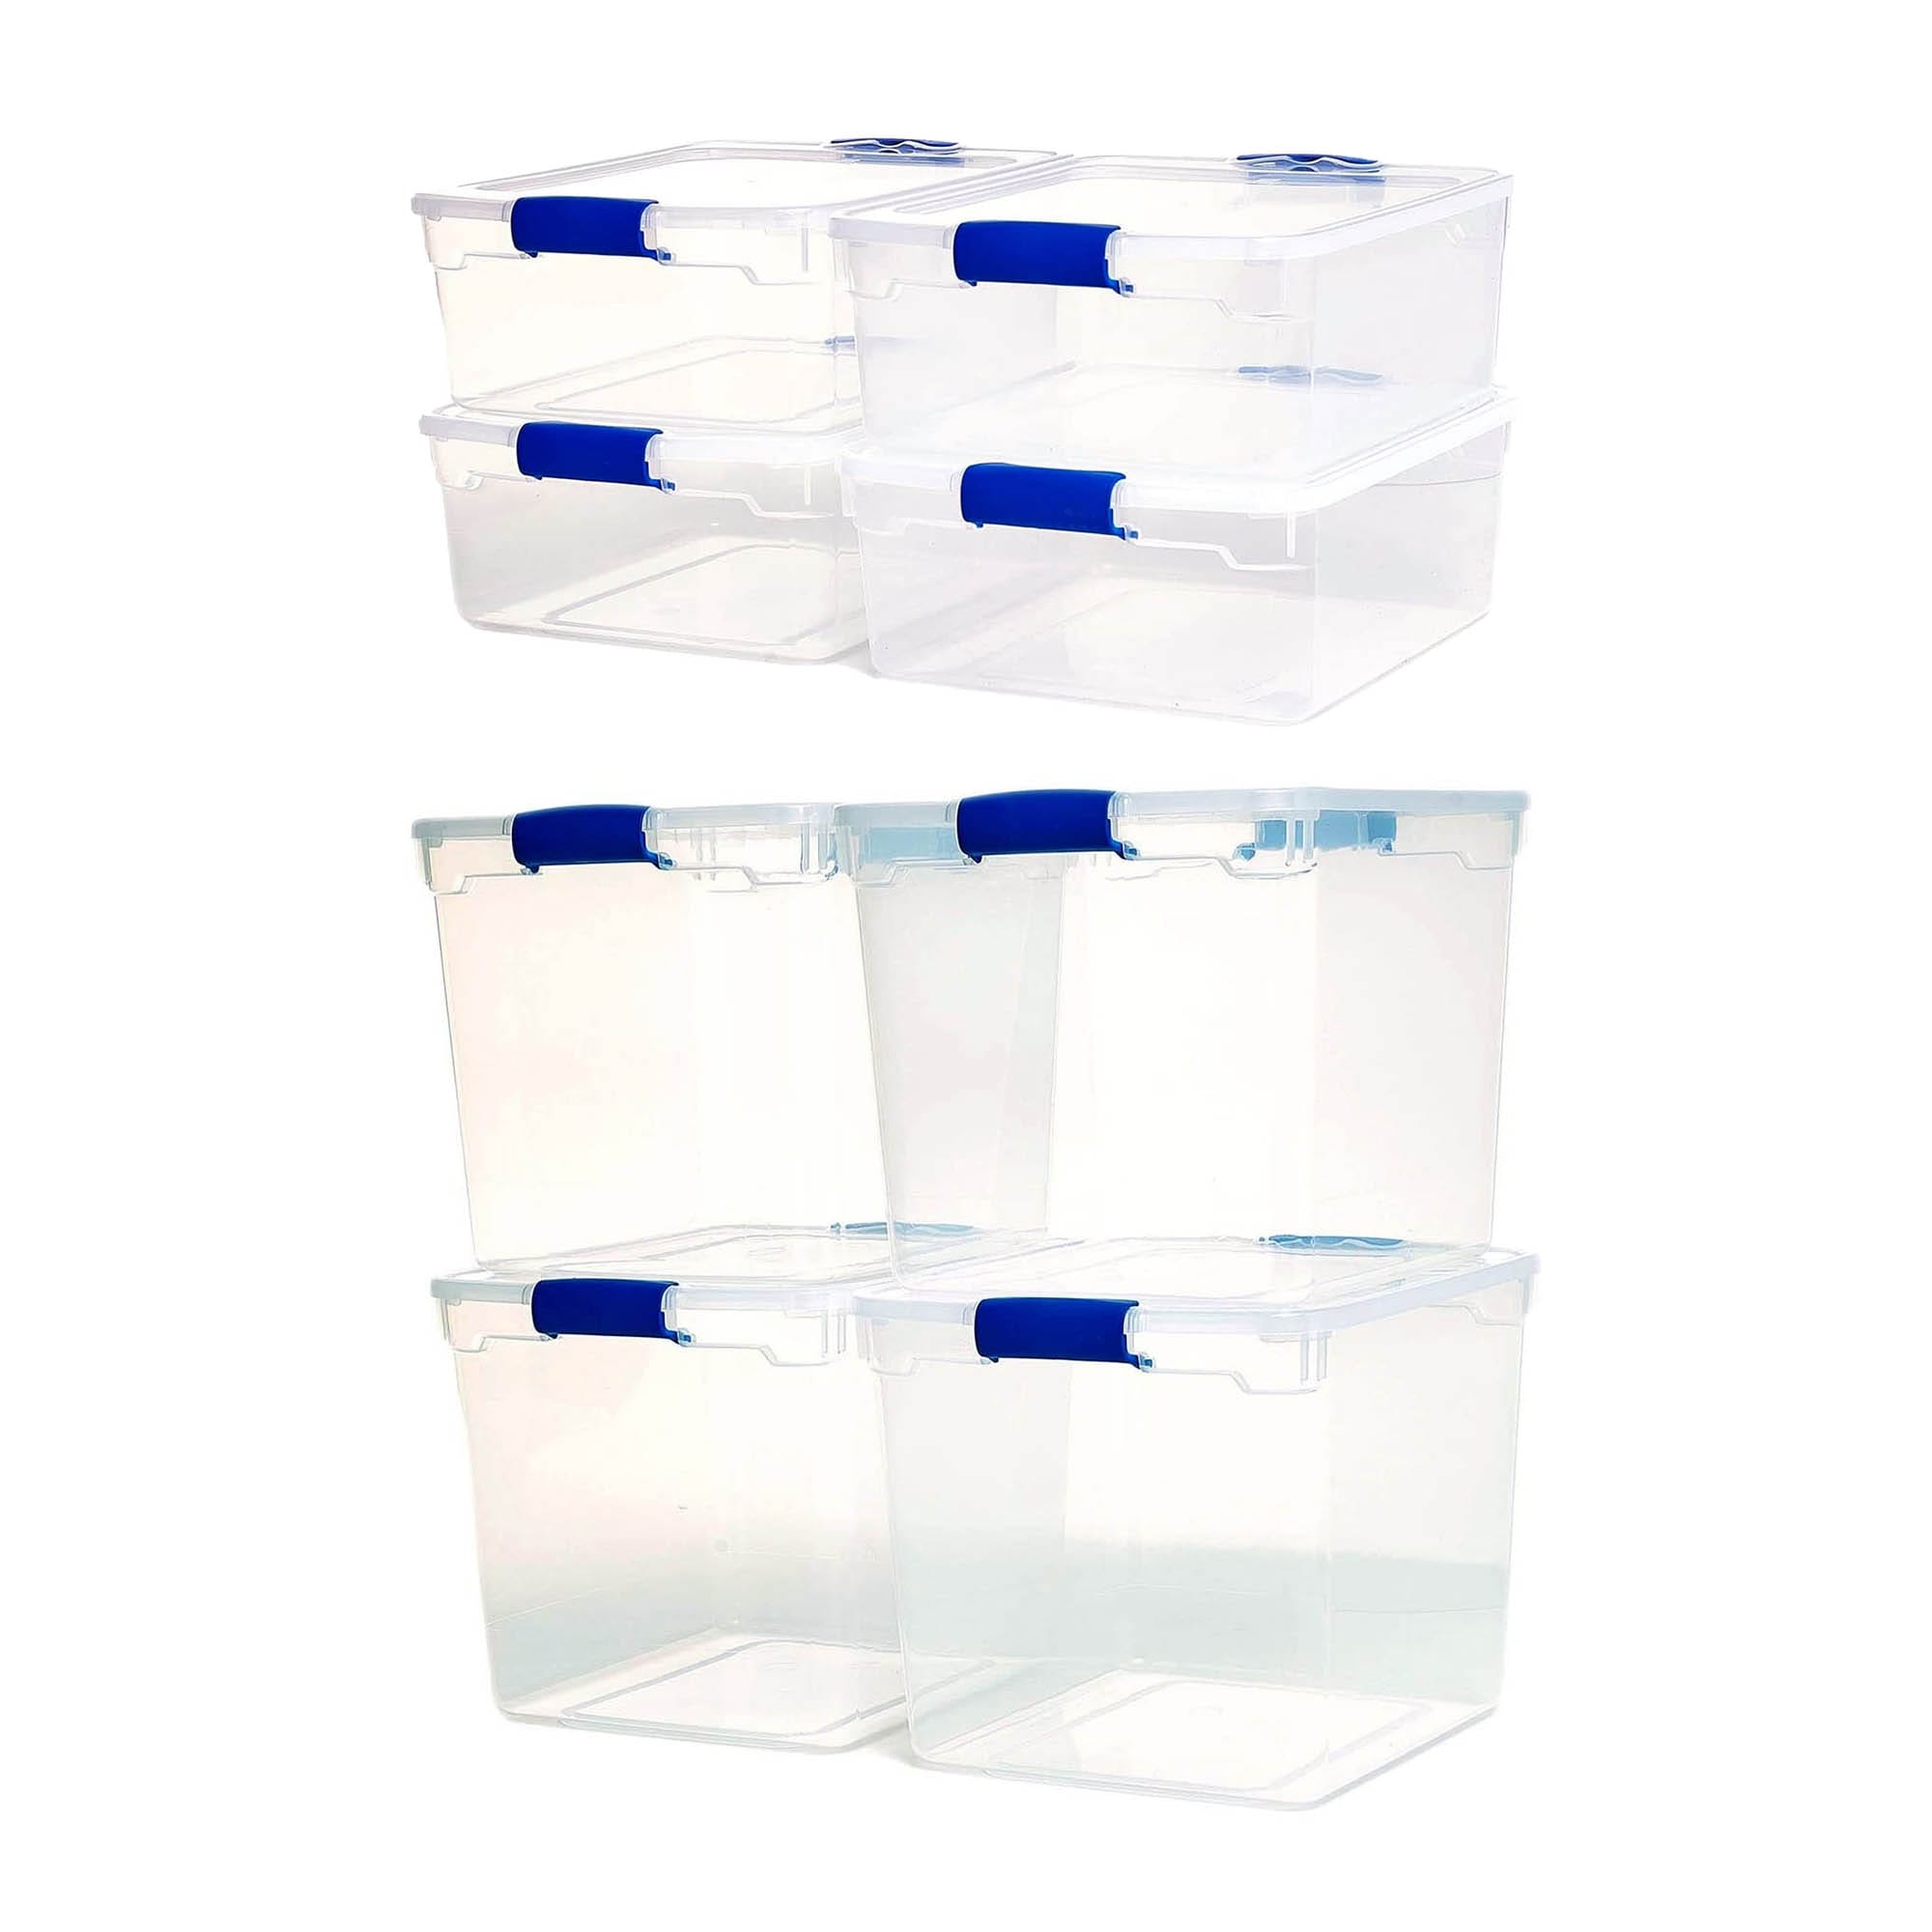  HOMZ 7.5 Quart Clear Plastic Stackable Storage Container Tote  with Secure Latching Lid for Home and Office Organization, 5 Pack